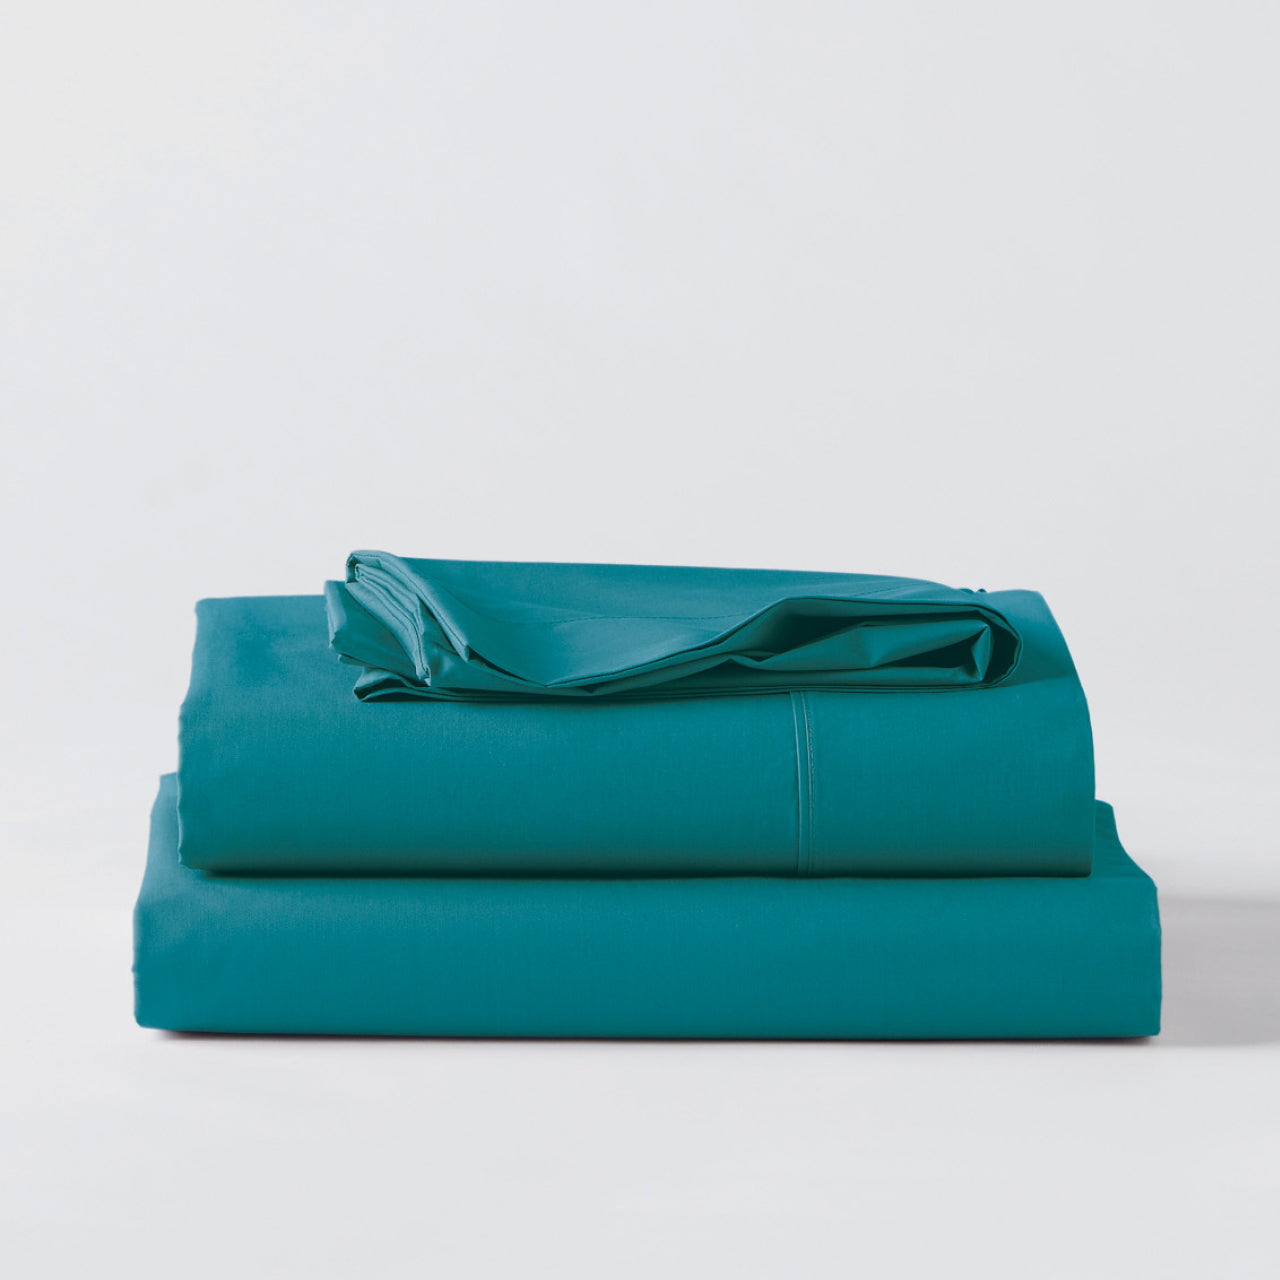 Premium Percale Teal Sheets folded up on floor